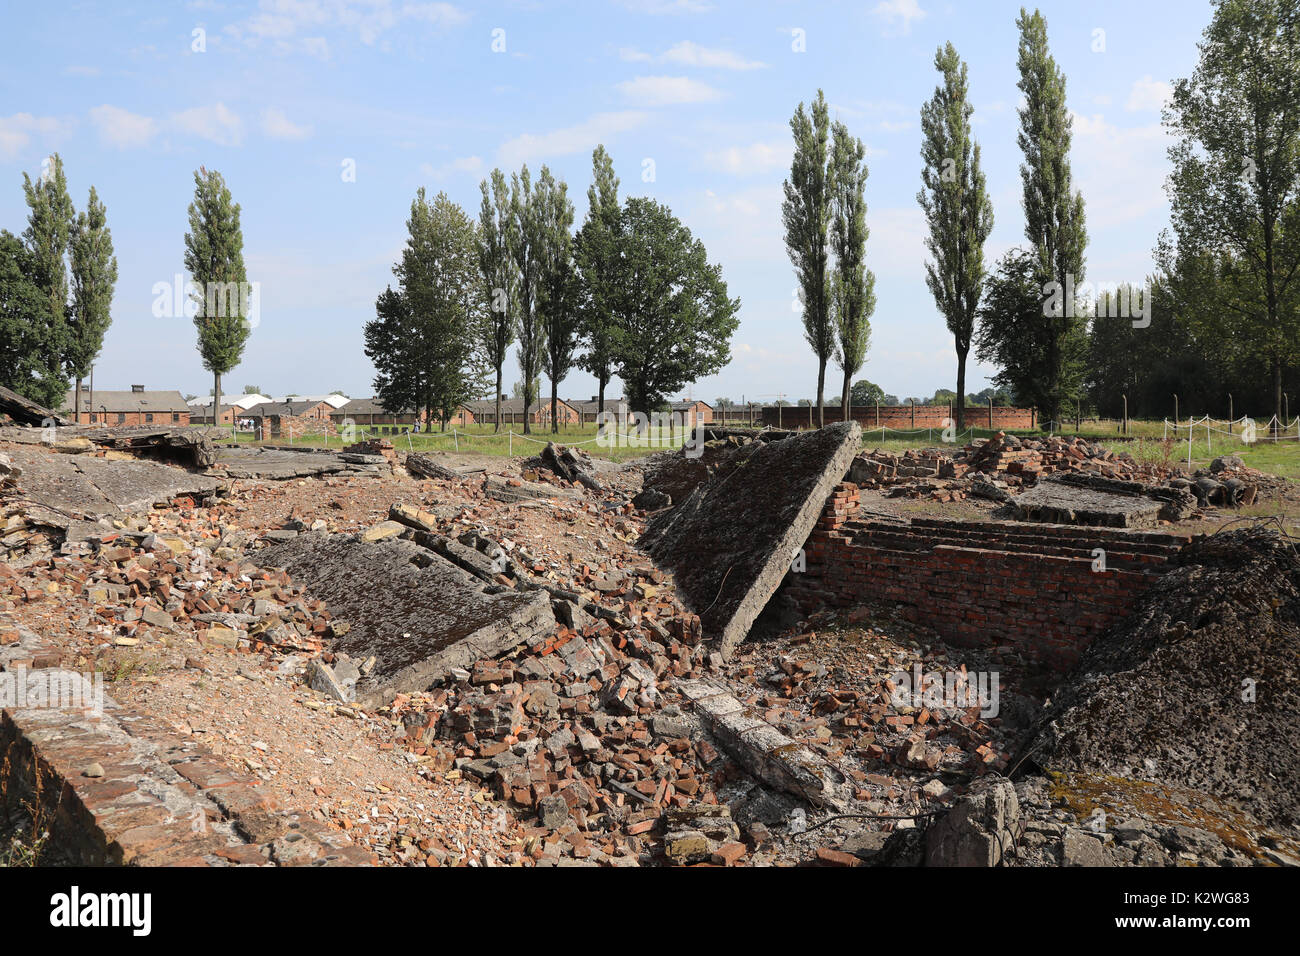 The ruins of one of the crematoriums at the Nazi concentration camp of Auschwitz Birkenau, close to the town of Oświęcim, Poland, photographed on 25 A Stock Photo